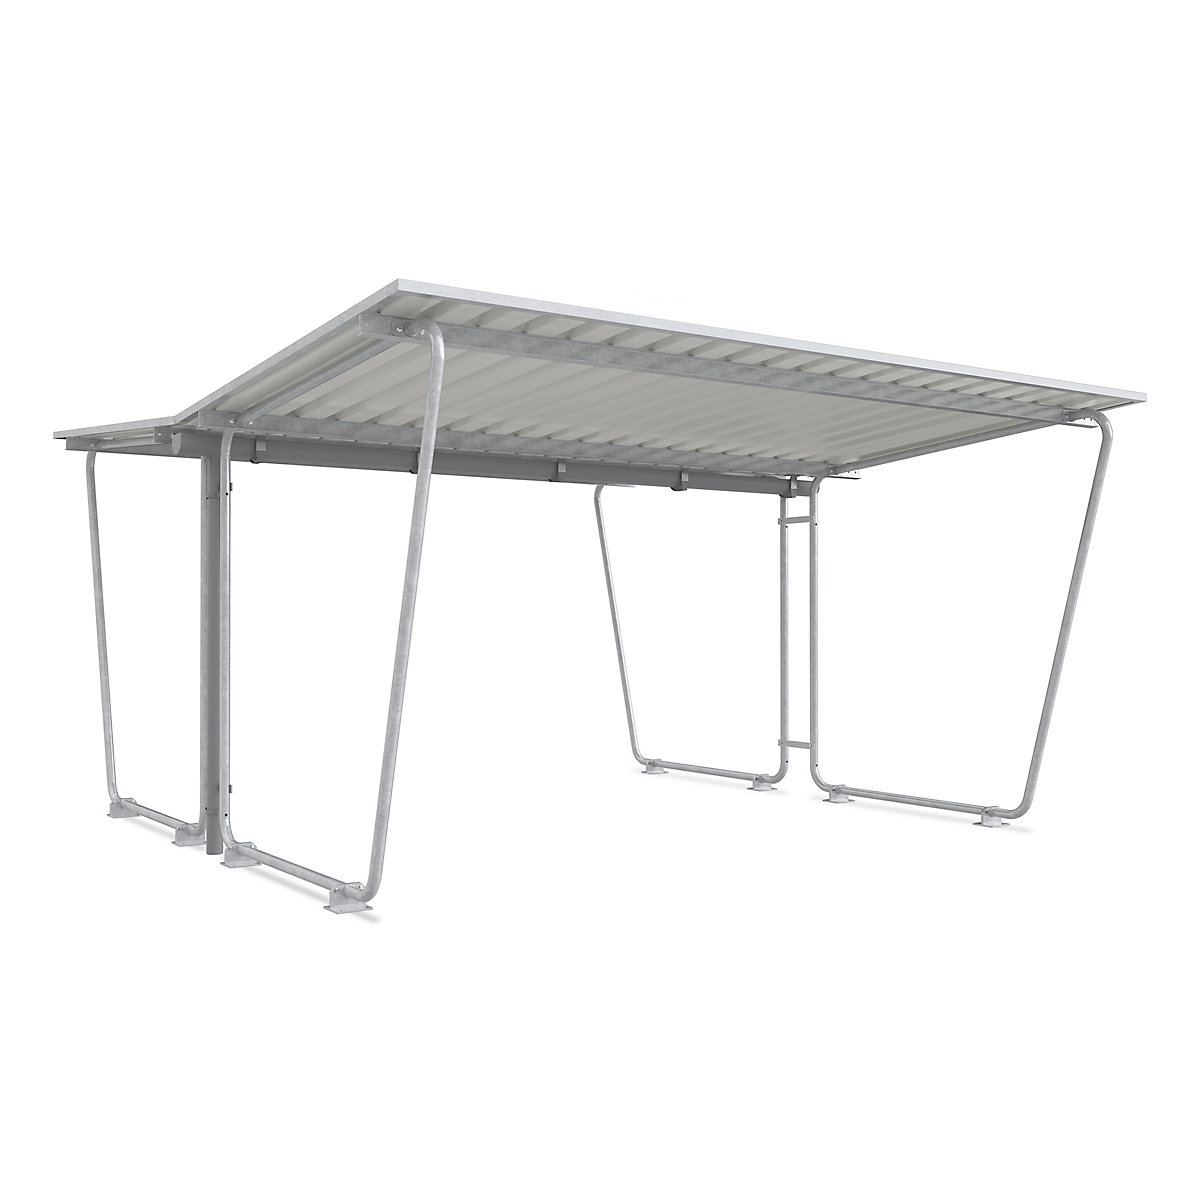 Shelter, standard unit, double sided, made of profiled metal sheet, depth 4660 mm-5